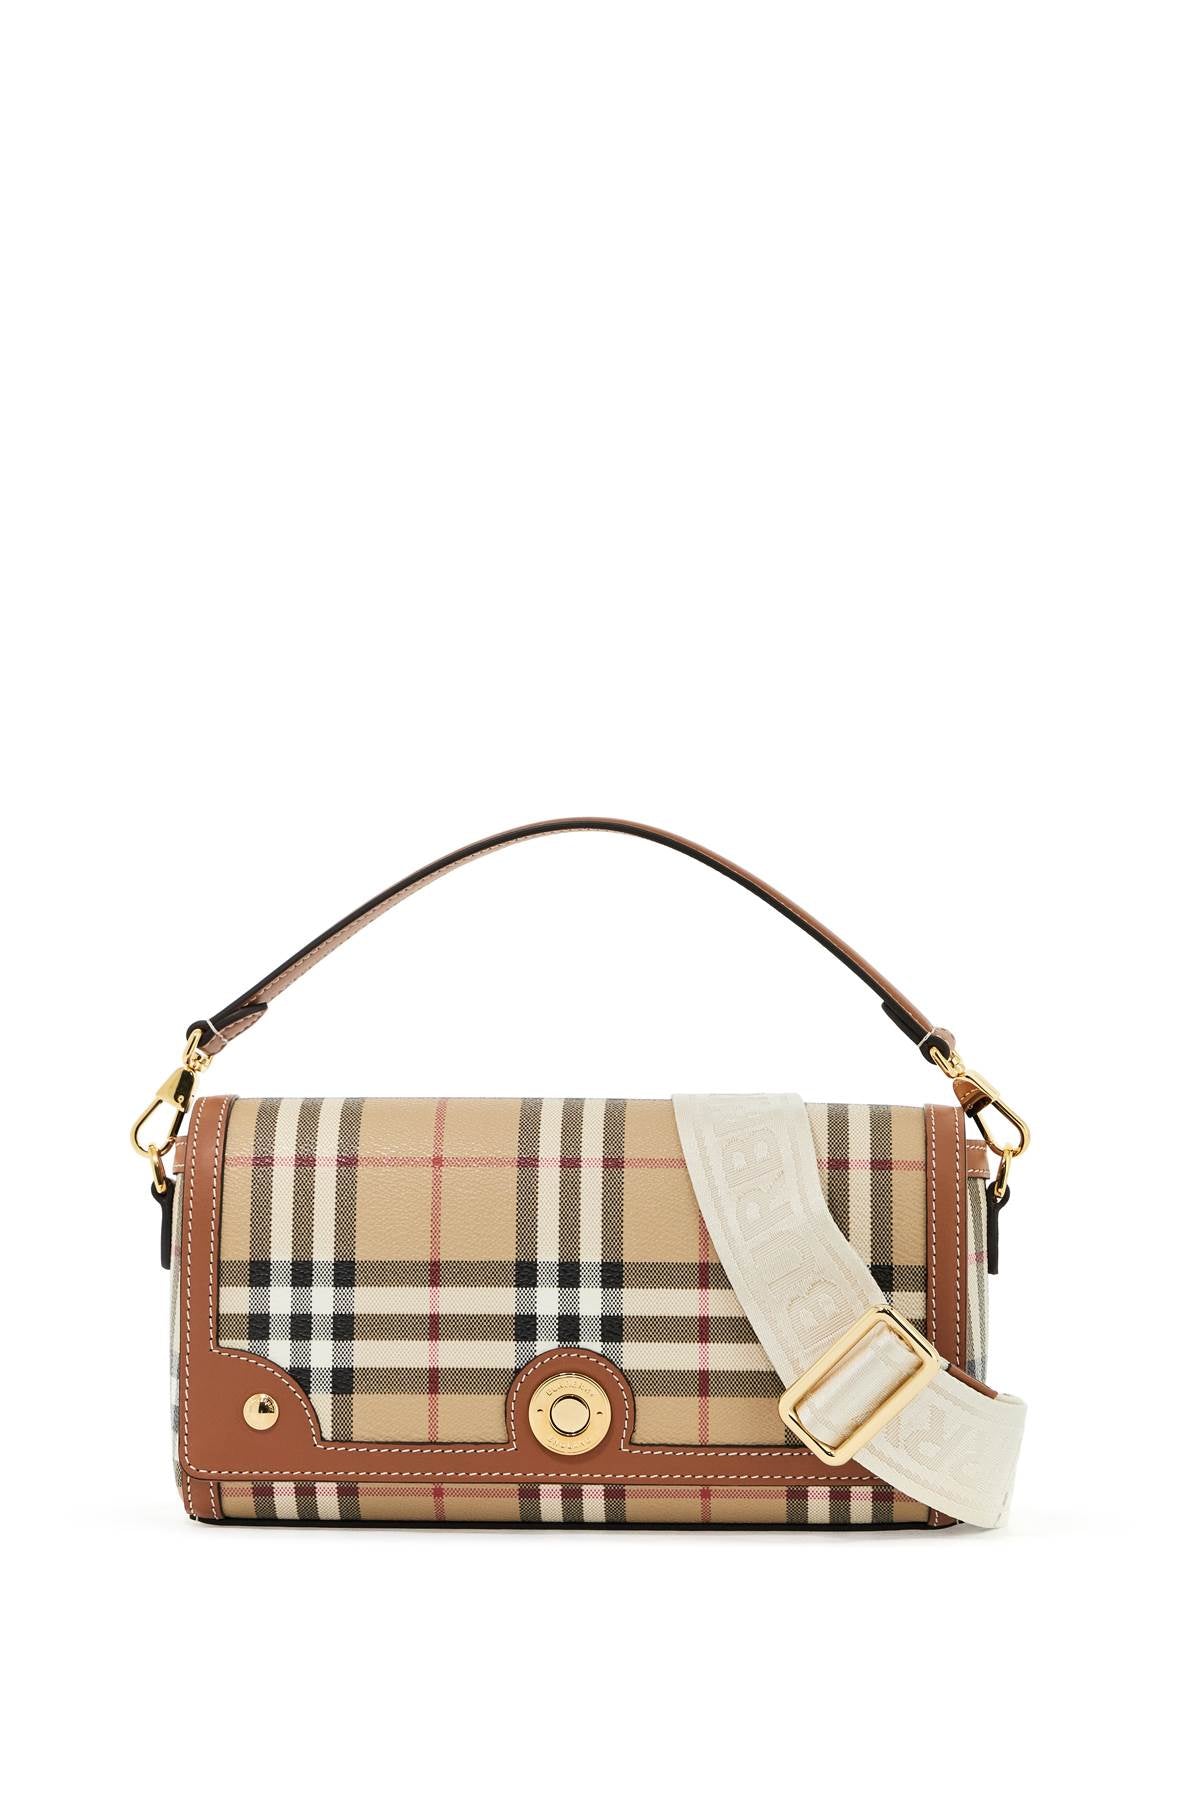 BURBERRY SHOULDER Handbag WITH CHECK PATTERN NOTES